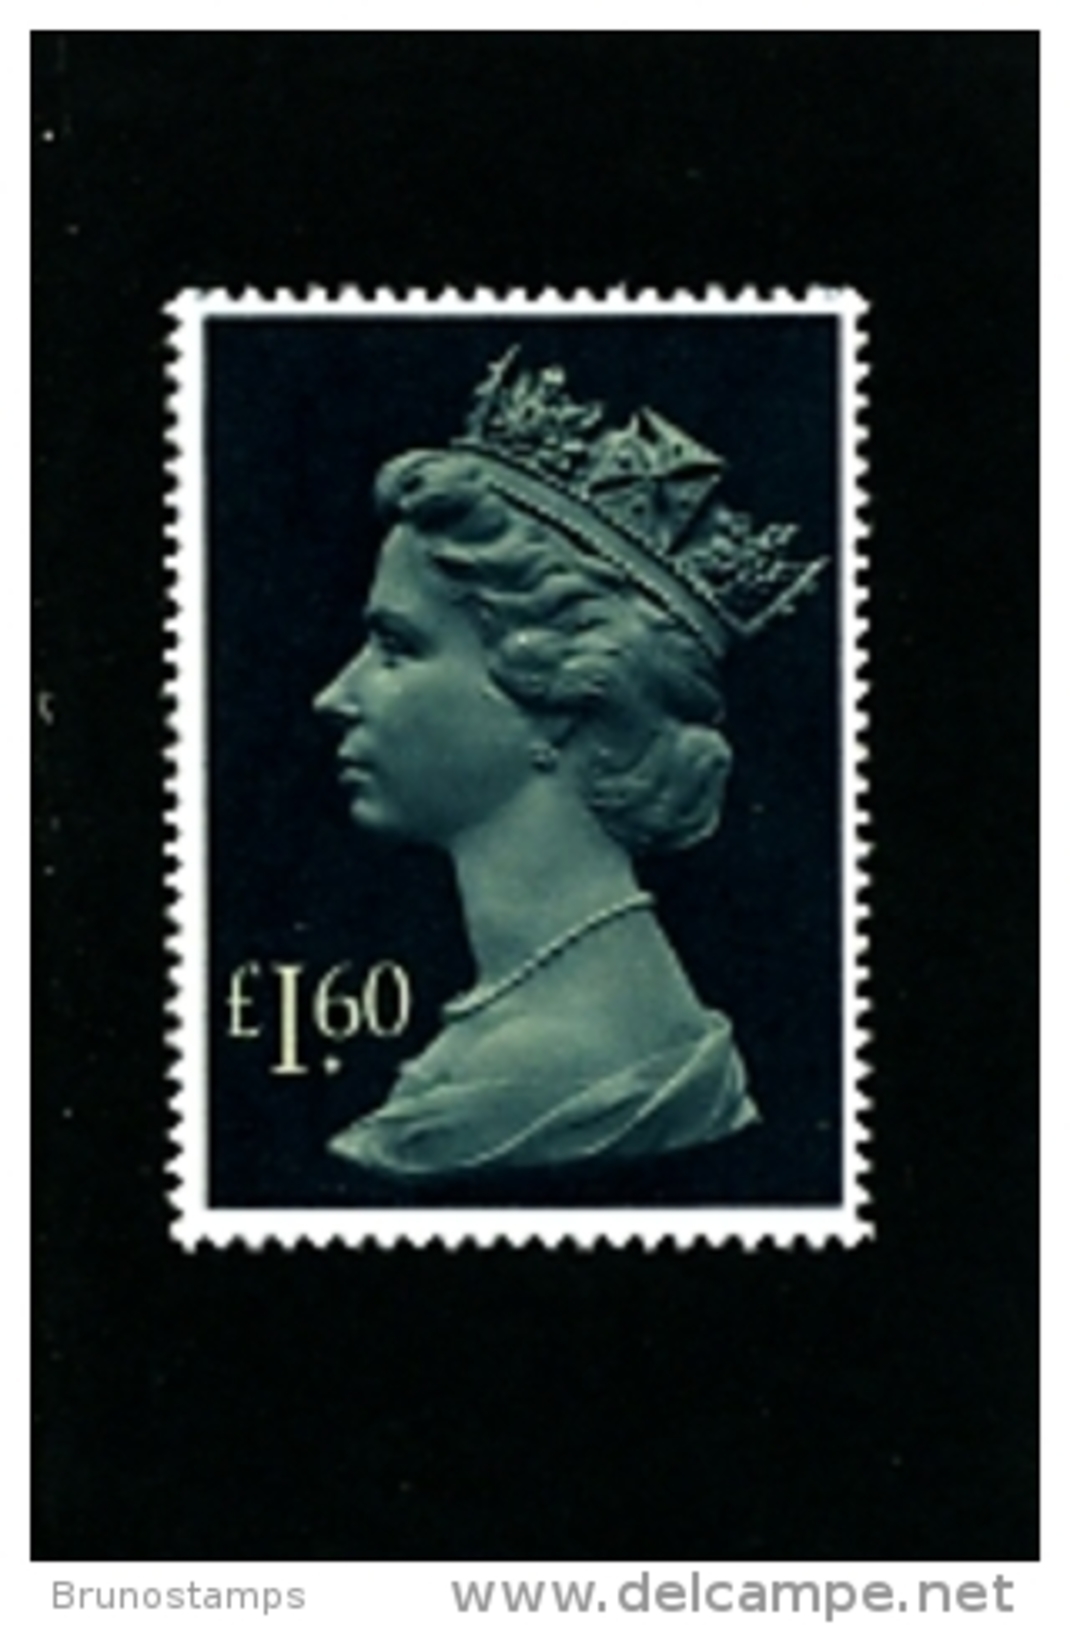 GREAT BRITAIN - 1987  £ 1.60  PARCEL  HIGH VALUE  MINT NH - Nuovi